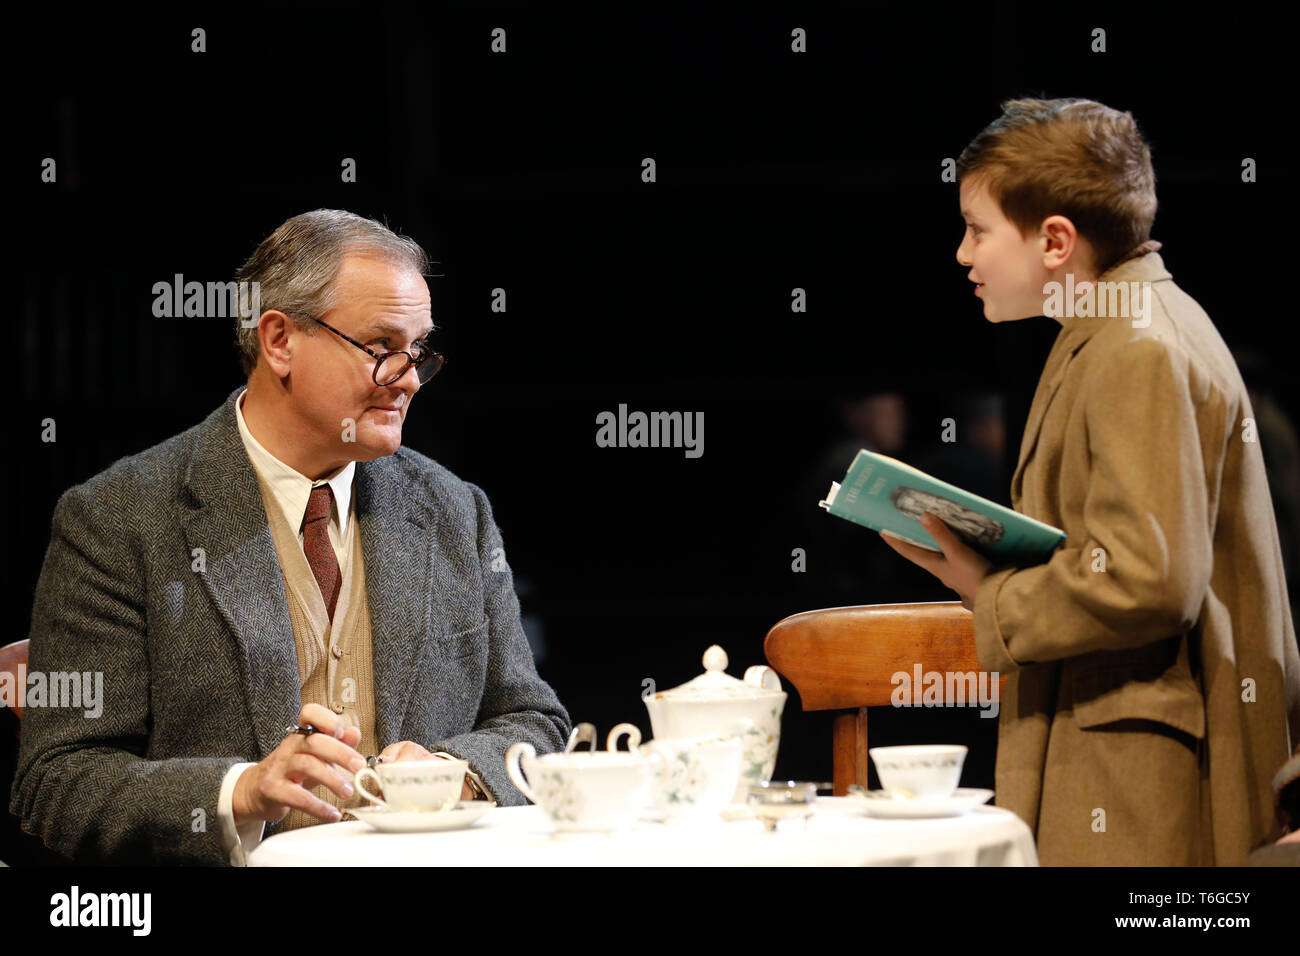 Chichester, UK. 1st May 2019. Hugh Bonneville (L) performs as C.S. Lewis, with Eddie Martin (as Douglas Gresham) during a photocall for William Nicholson's 'Shadowlands' at the Chichester Festival Theatre in West Sussex, UK Wednesday May, 1, 2019. The play, directed by Rachel Kavanaugh, runs until May 25. Photograph : Credit: Luke MacGregor/Alamy Live News Stock Photo